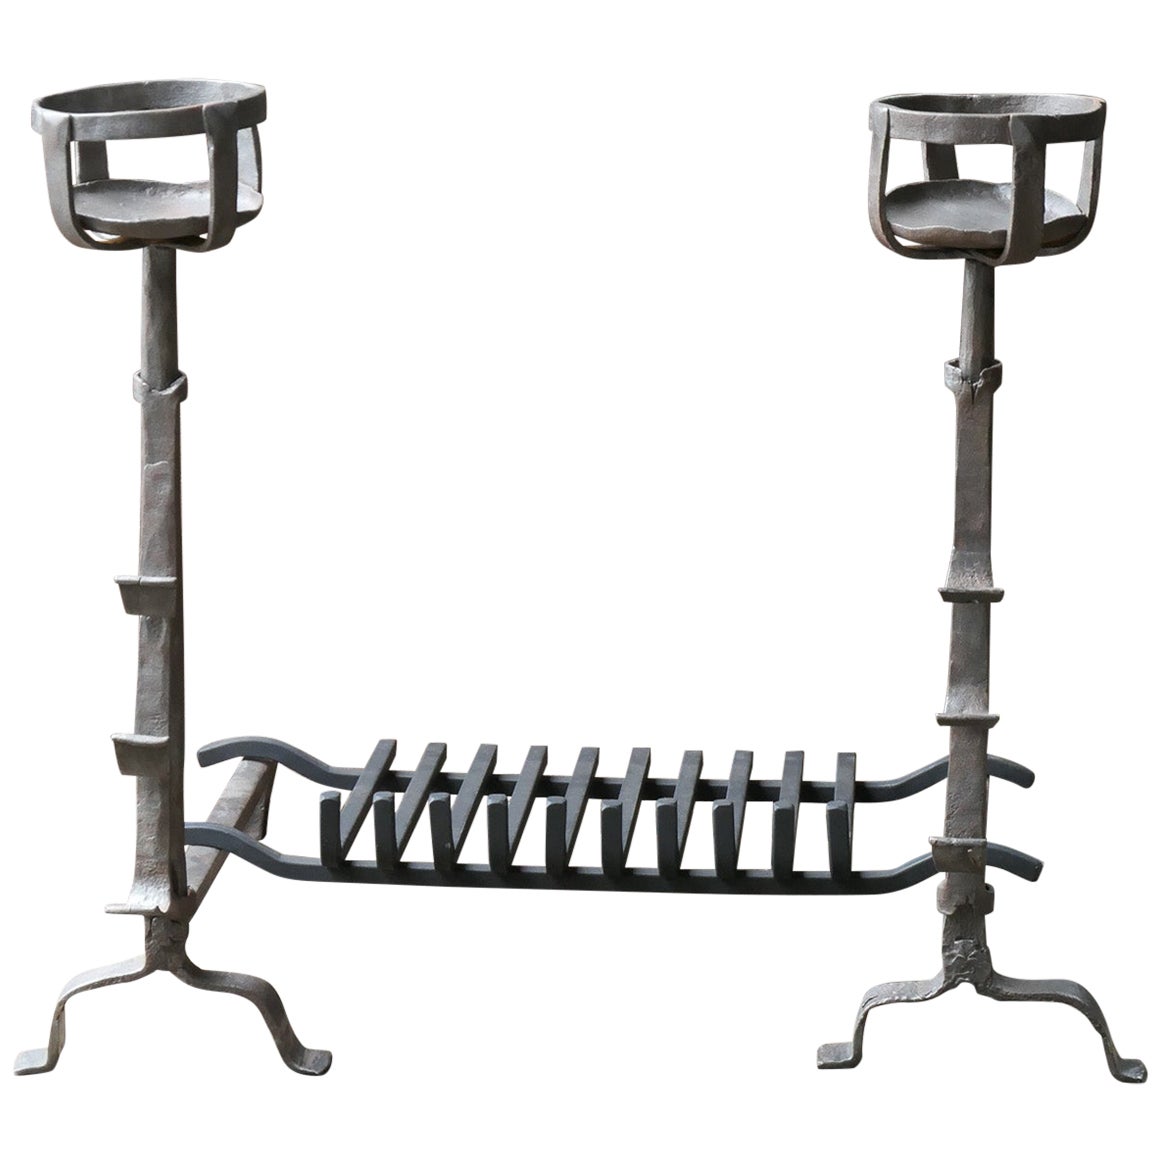 Antique French Gothic Fireplace Grate or Fire Basket, 17th Century For Sale